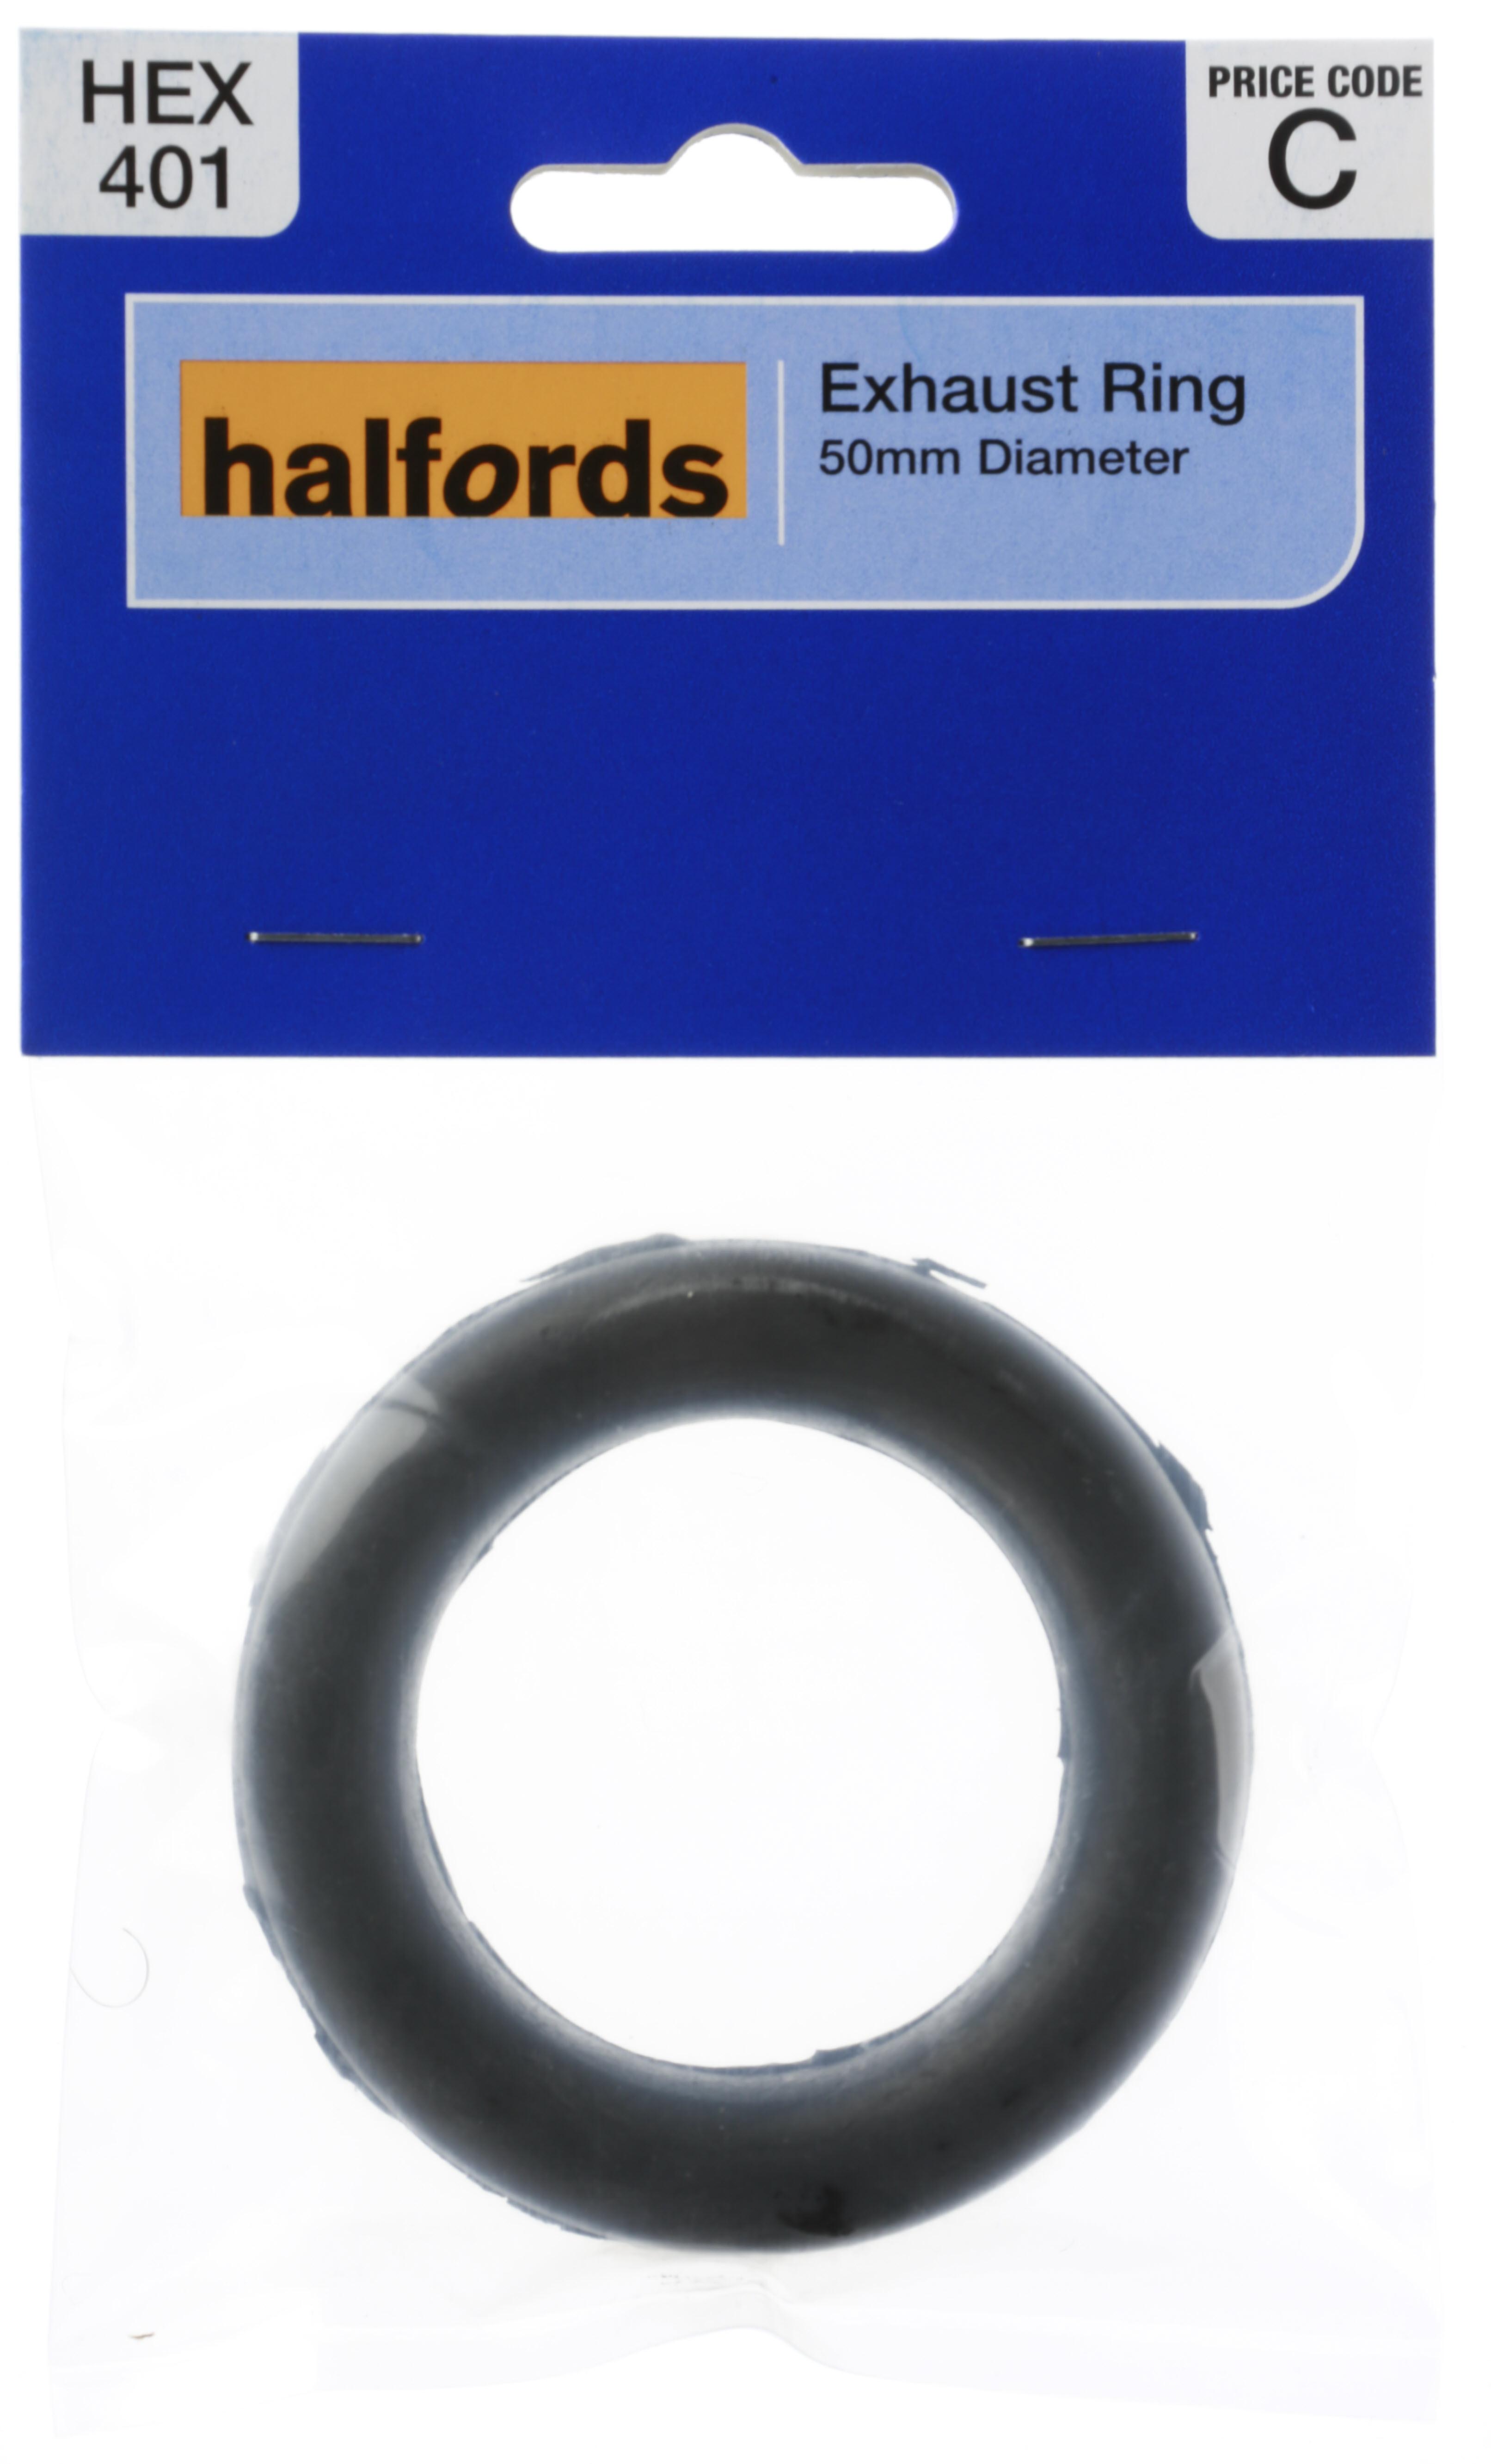 Halfords Exhaust Ring Hex401